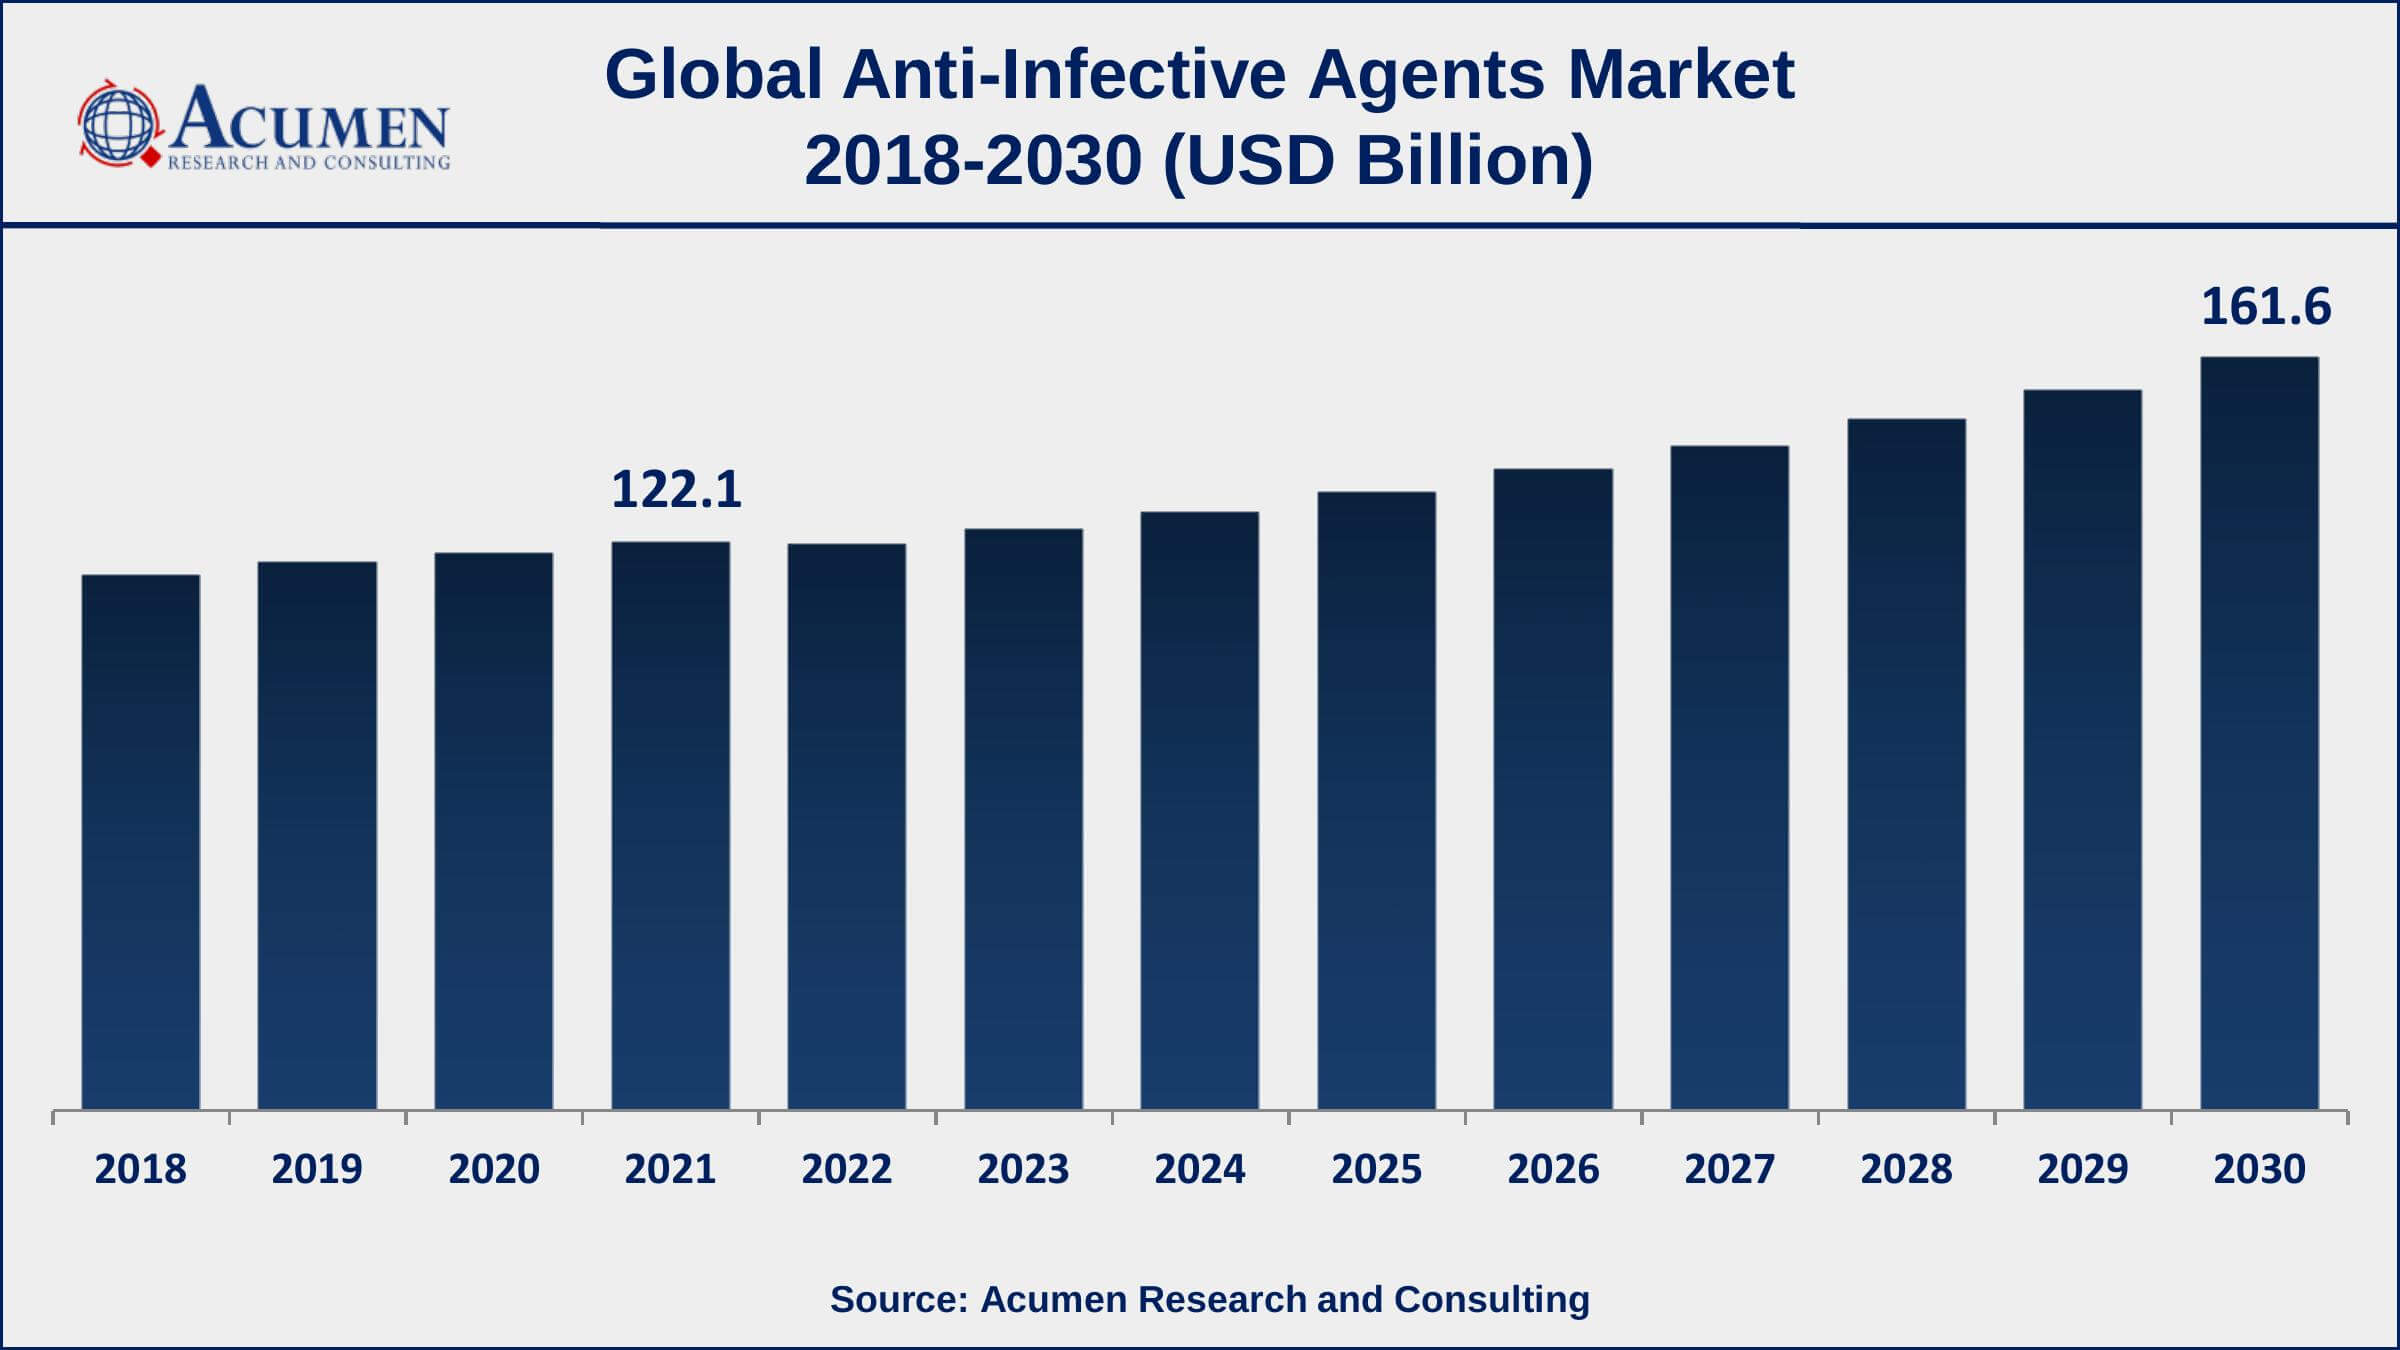 Asia-Pacific anti-infective agents market growth will observe strongest CAGR from 2022 to 2030